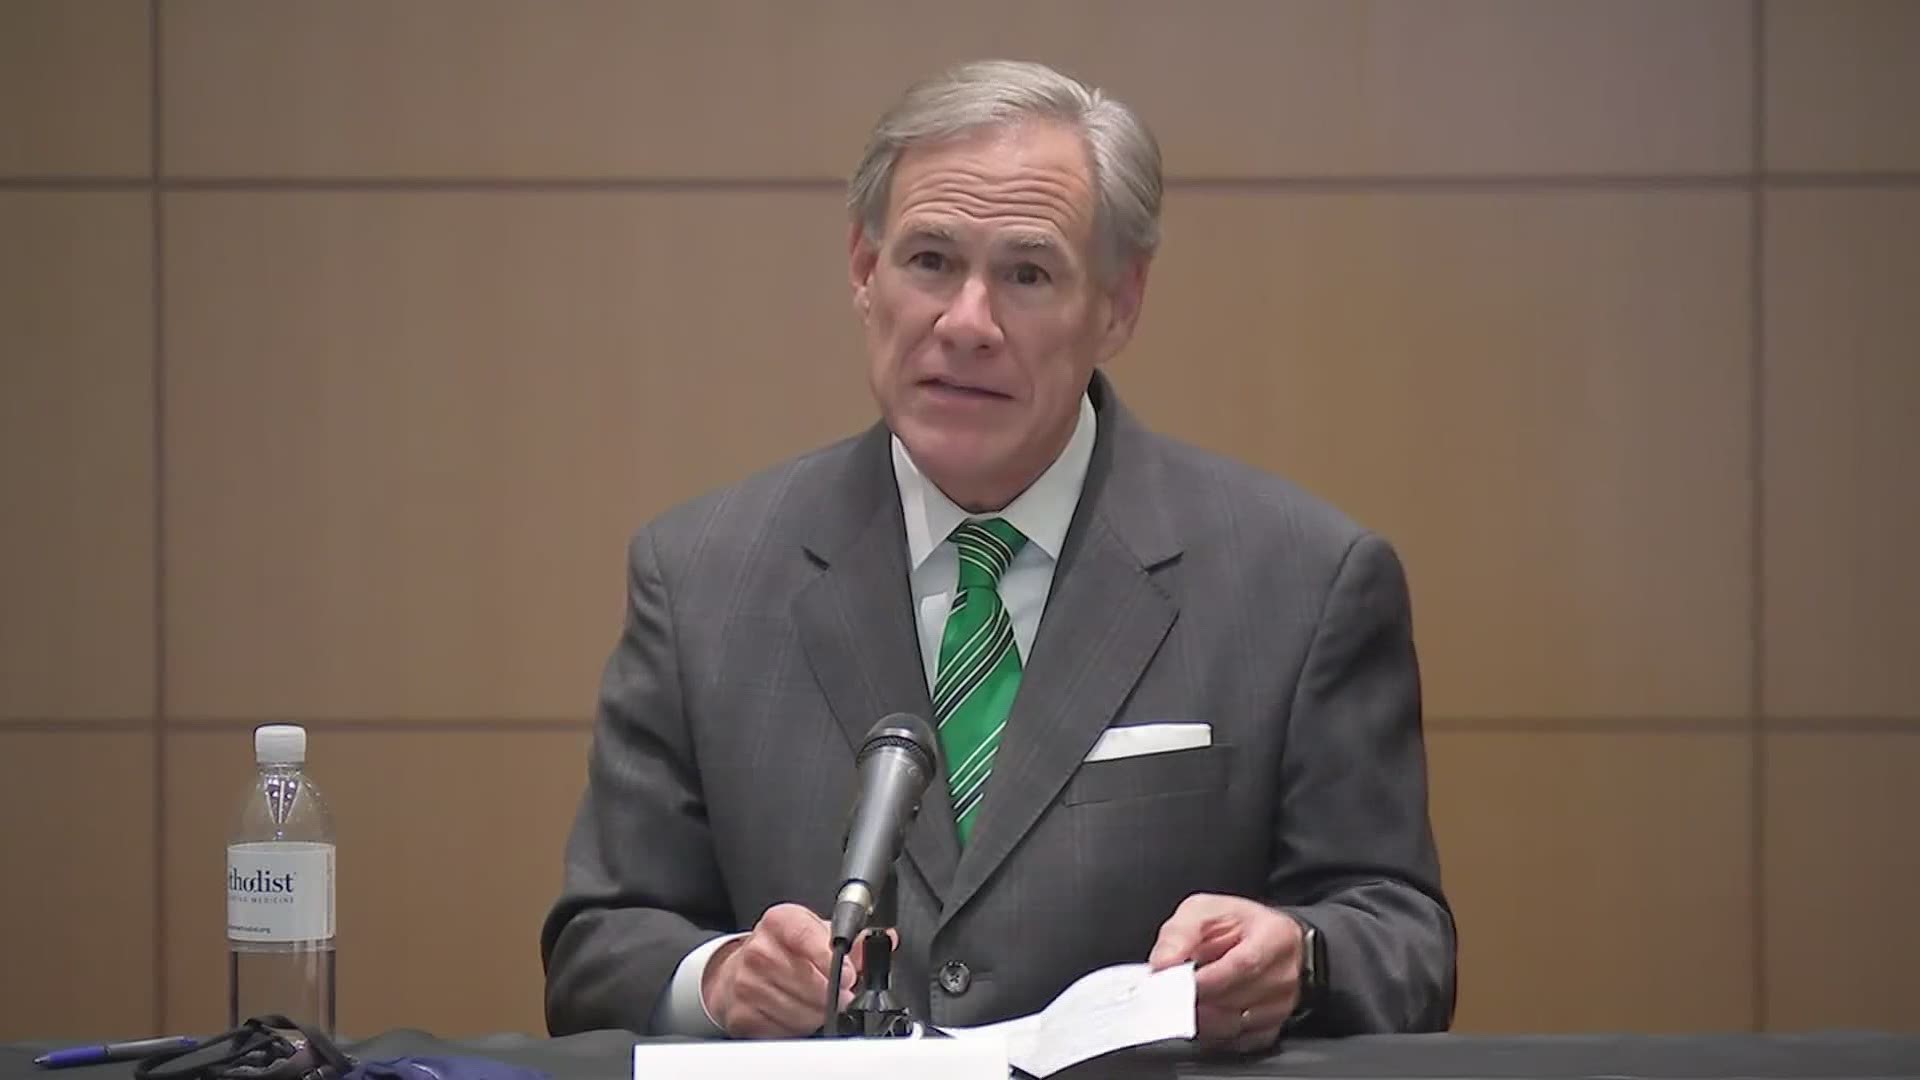 Gov. Greg Abbott was in Houston on Tuesday to discuss policies impacting healthcare in Texas with medical experts at Houston Methodist Hospital.